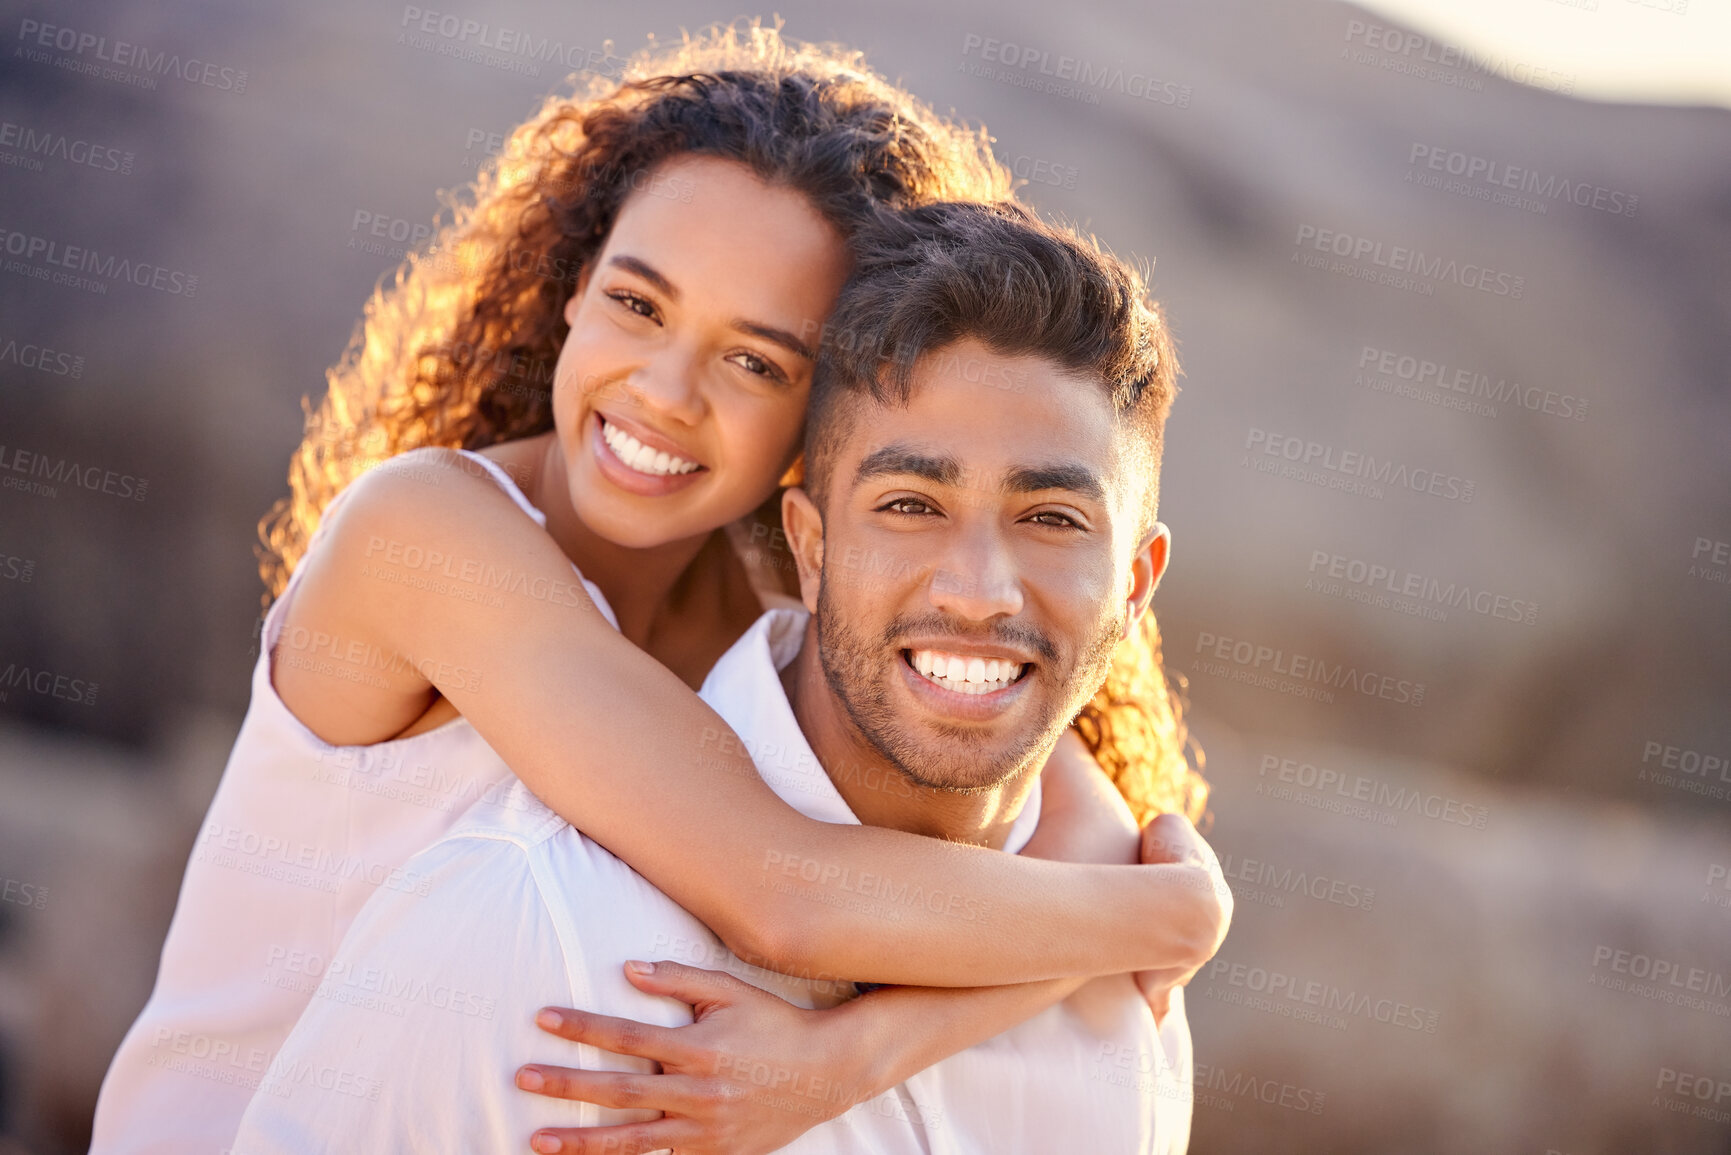 Buy stock photo Shot of a couple enjoying a day at the beach